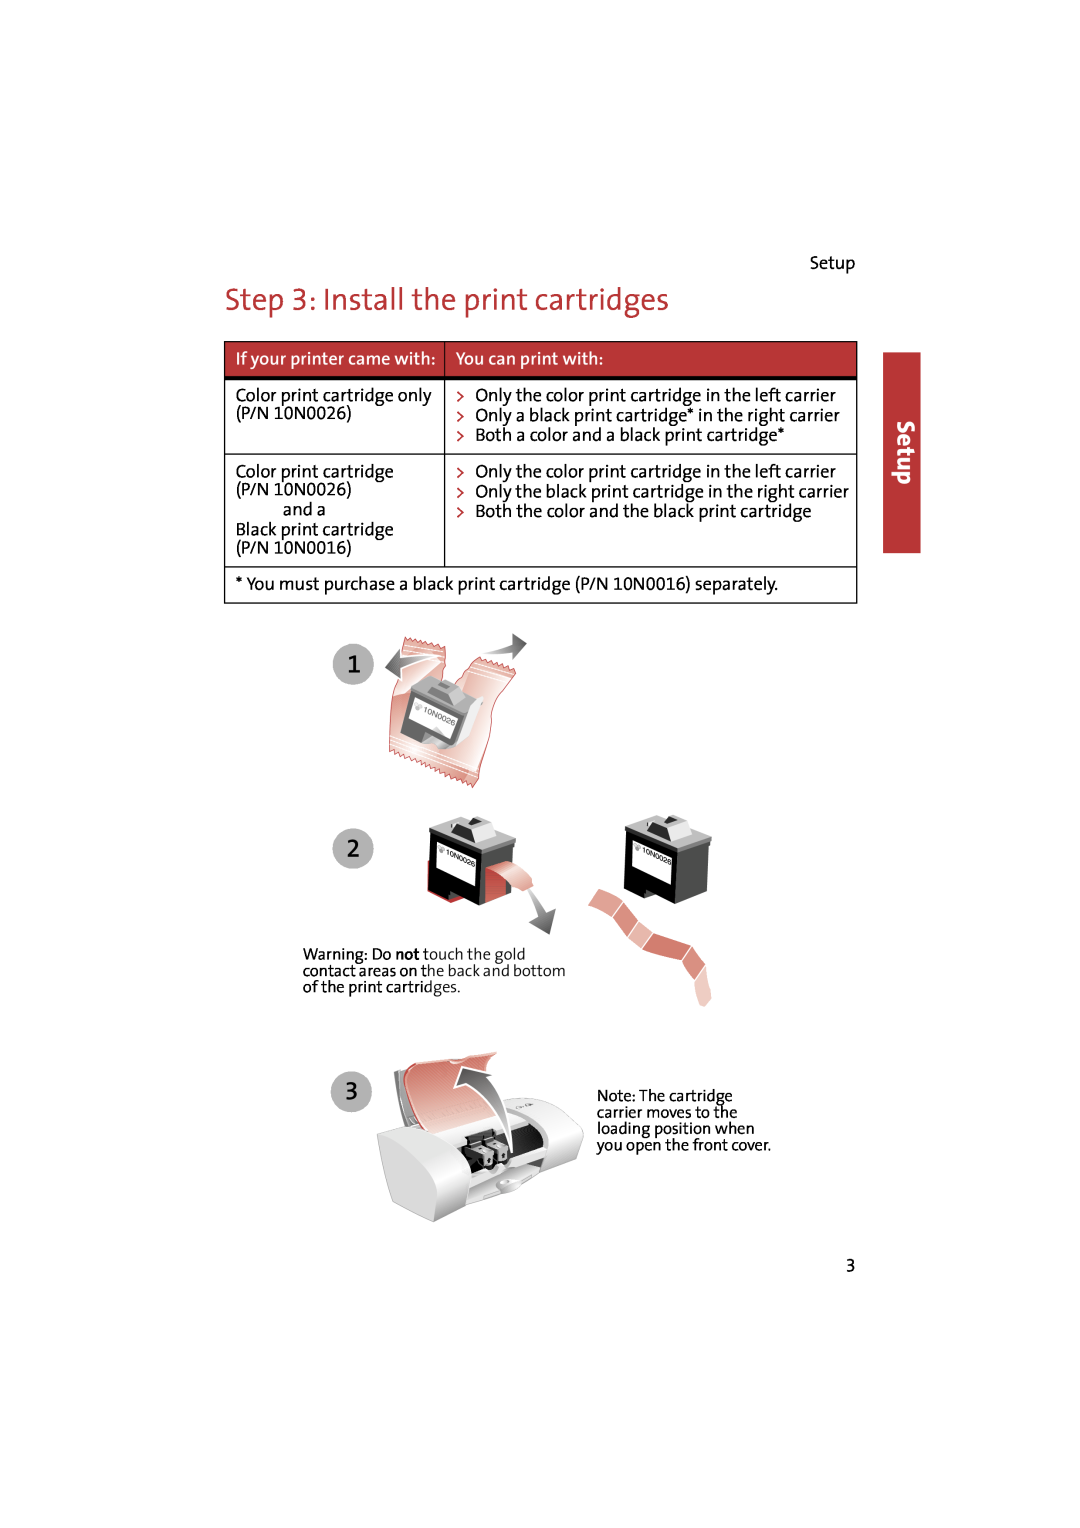 Compaq IJ650 manual Install the print cartridges, Setup, You can print with 